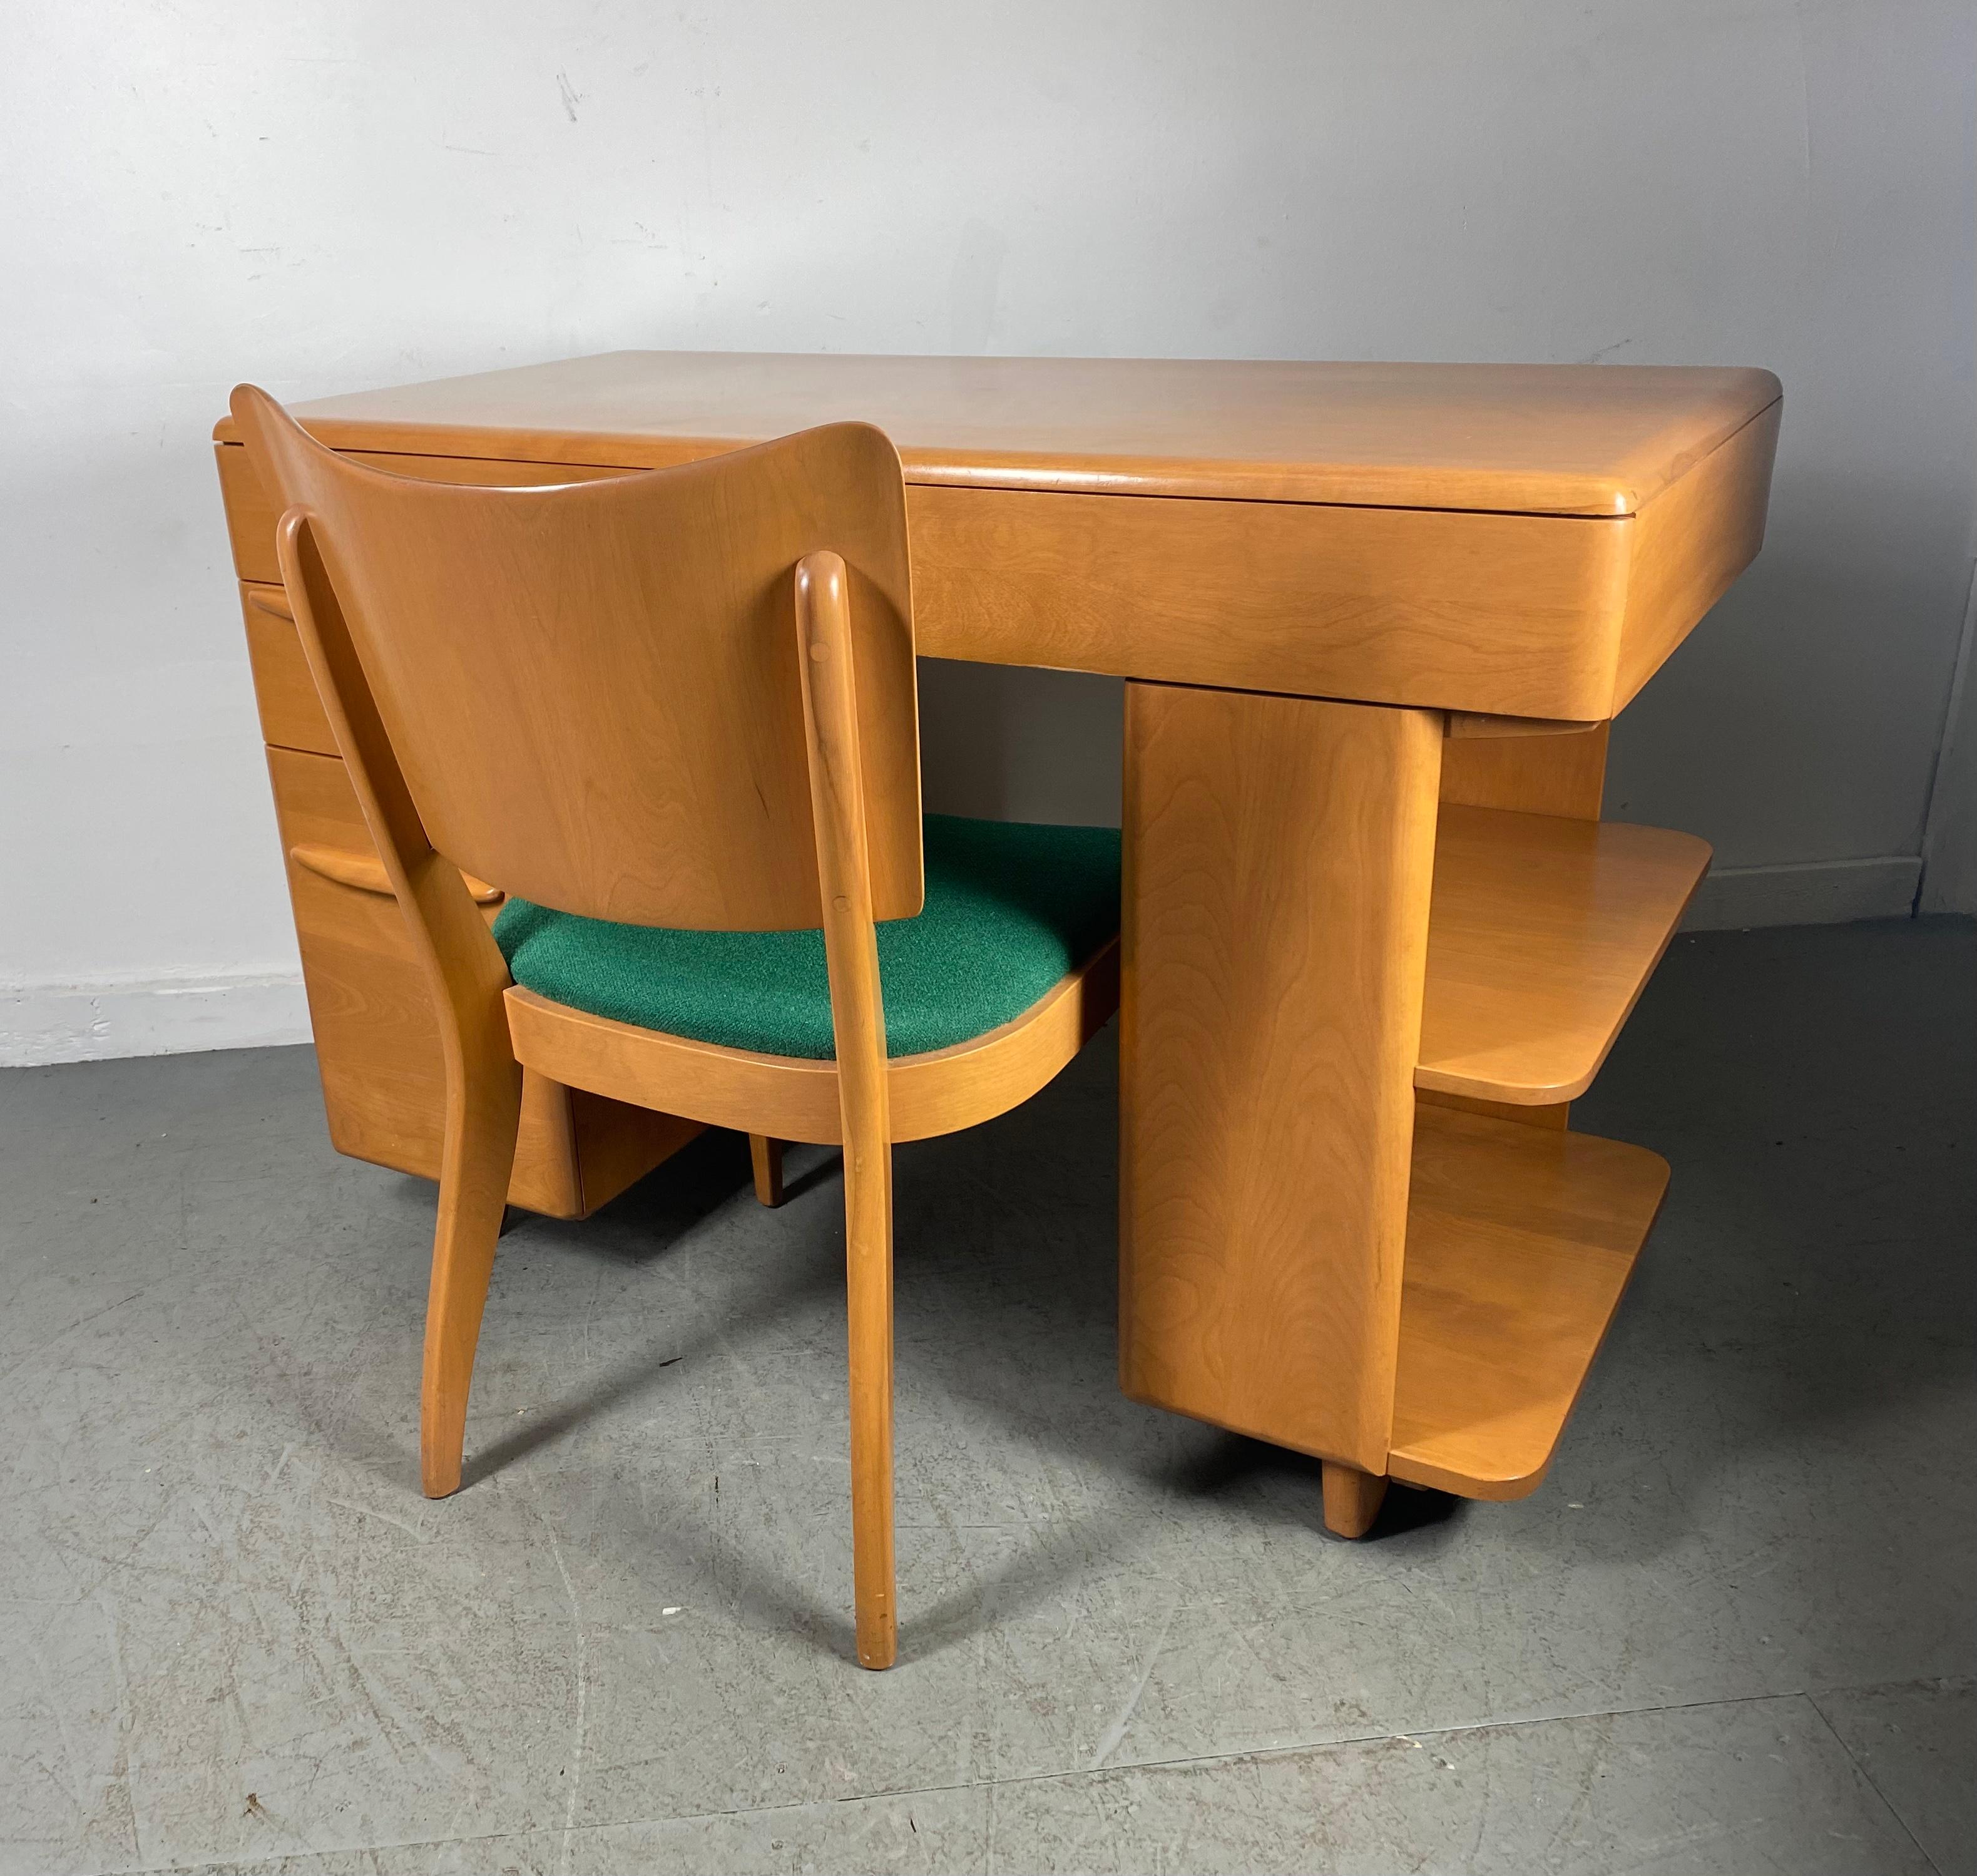 Classic Mid Century Modern Heywood Wakefield Desk and Chair, Bookcase Side 1